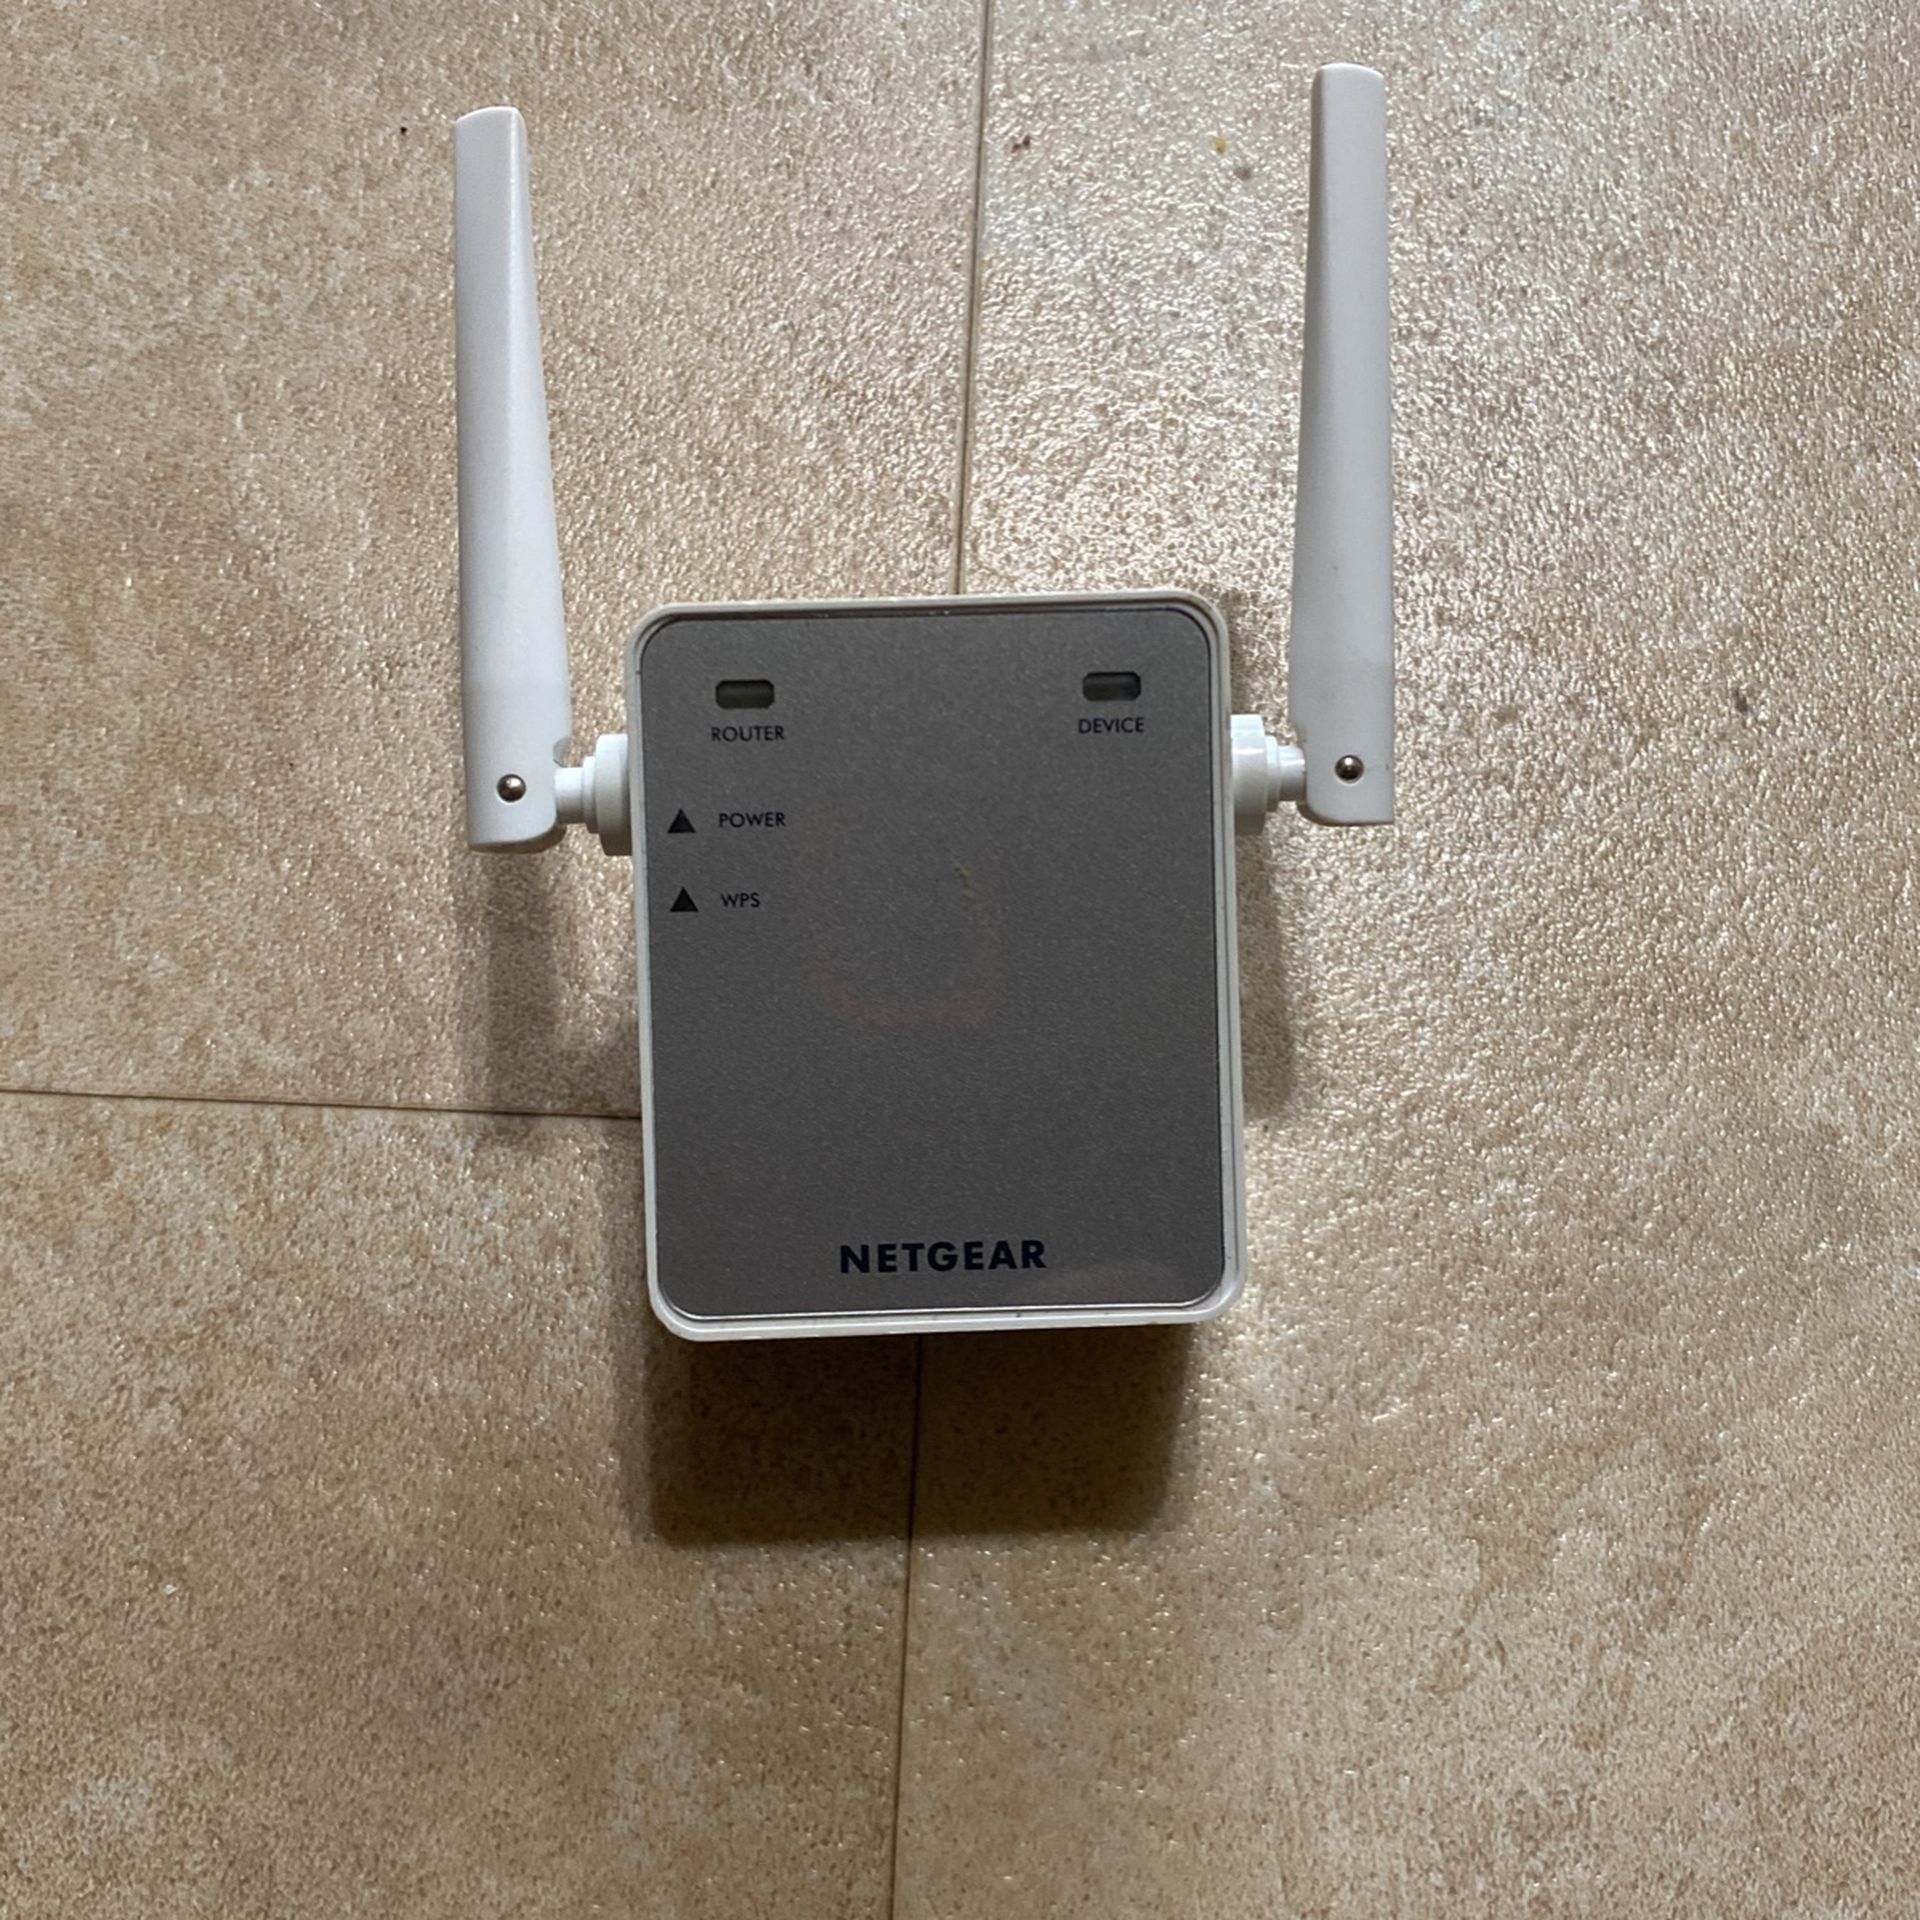 NETGEAR N300 WiFi Range Extender EX2700 Signal Booster up to 300 Mbps